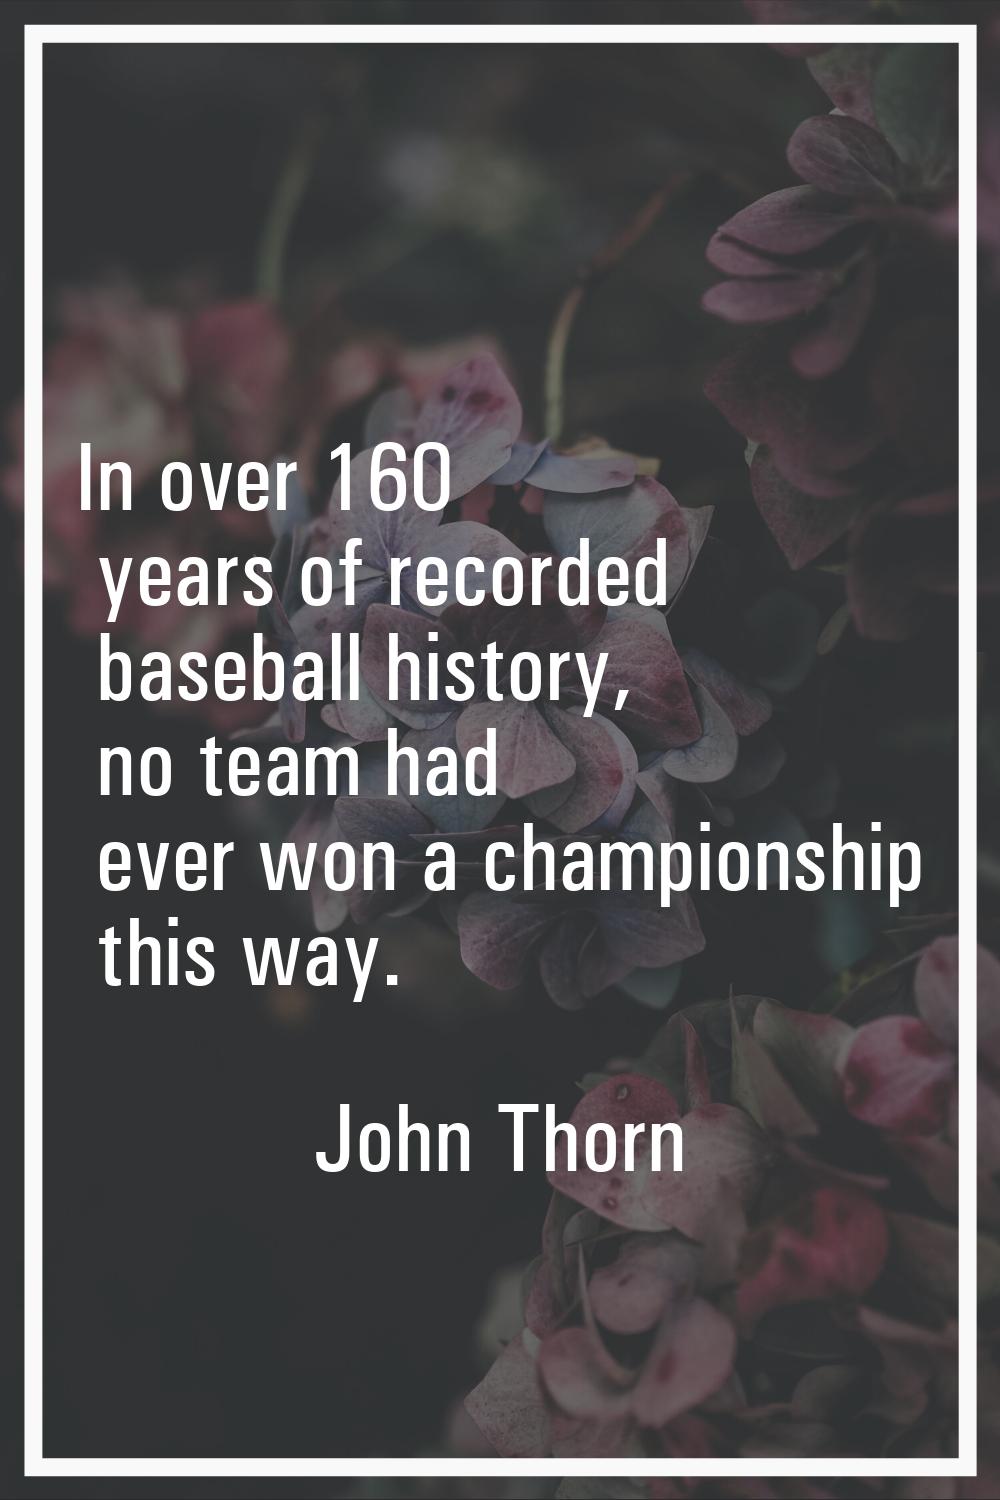 In over 160 years of recorded baseball history, no team had ever won a championship this way.